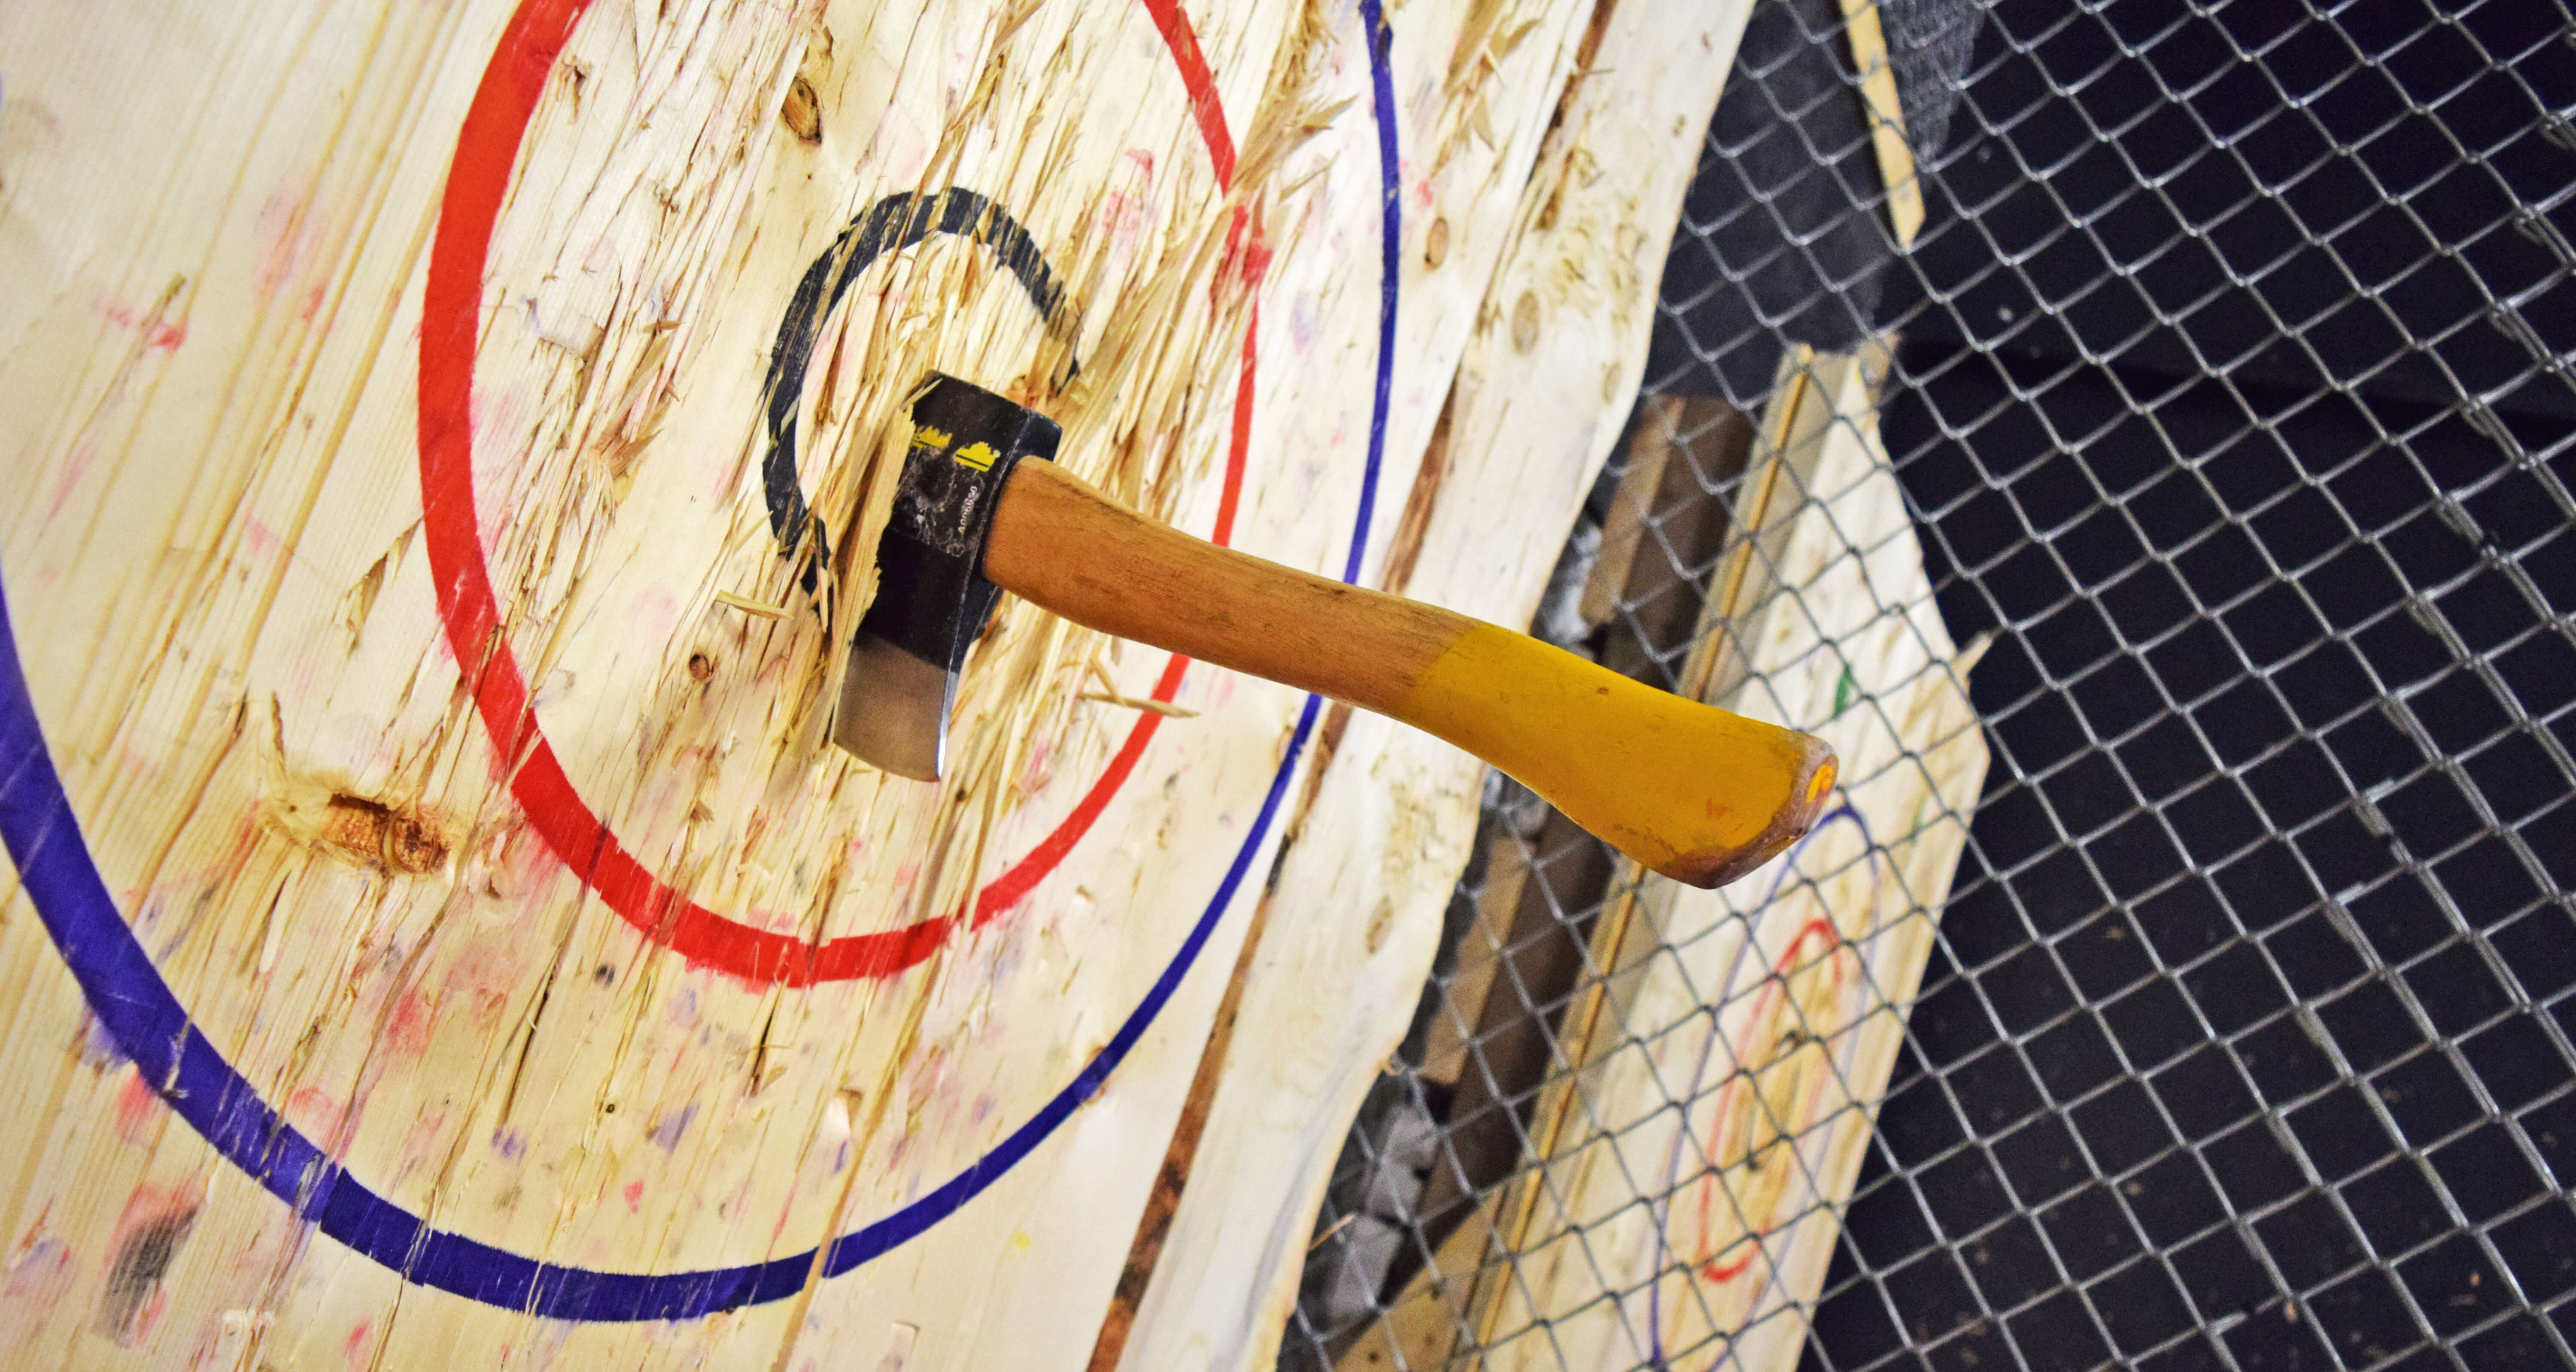 Benefits of Axe Throwing (for Beginners)